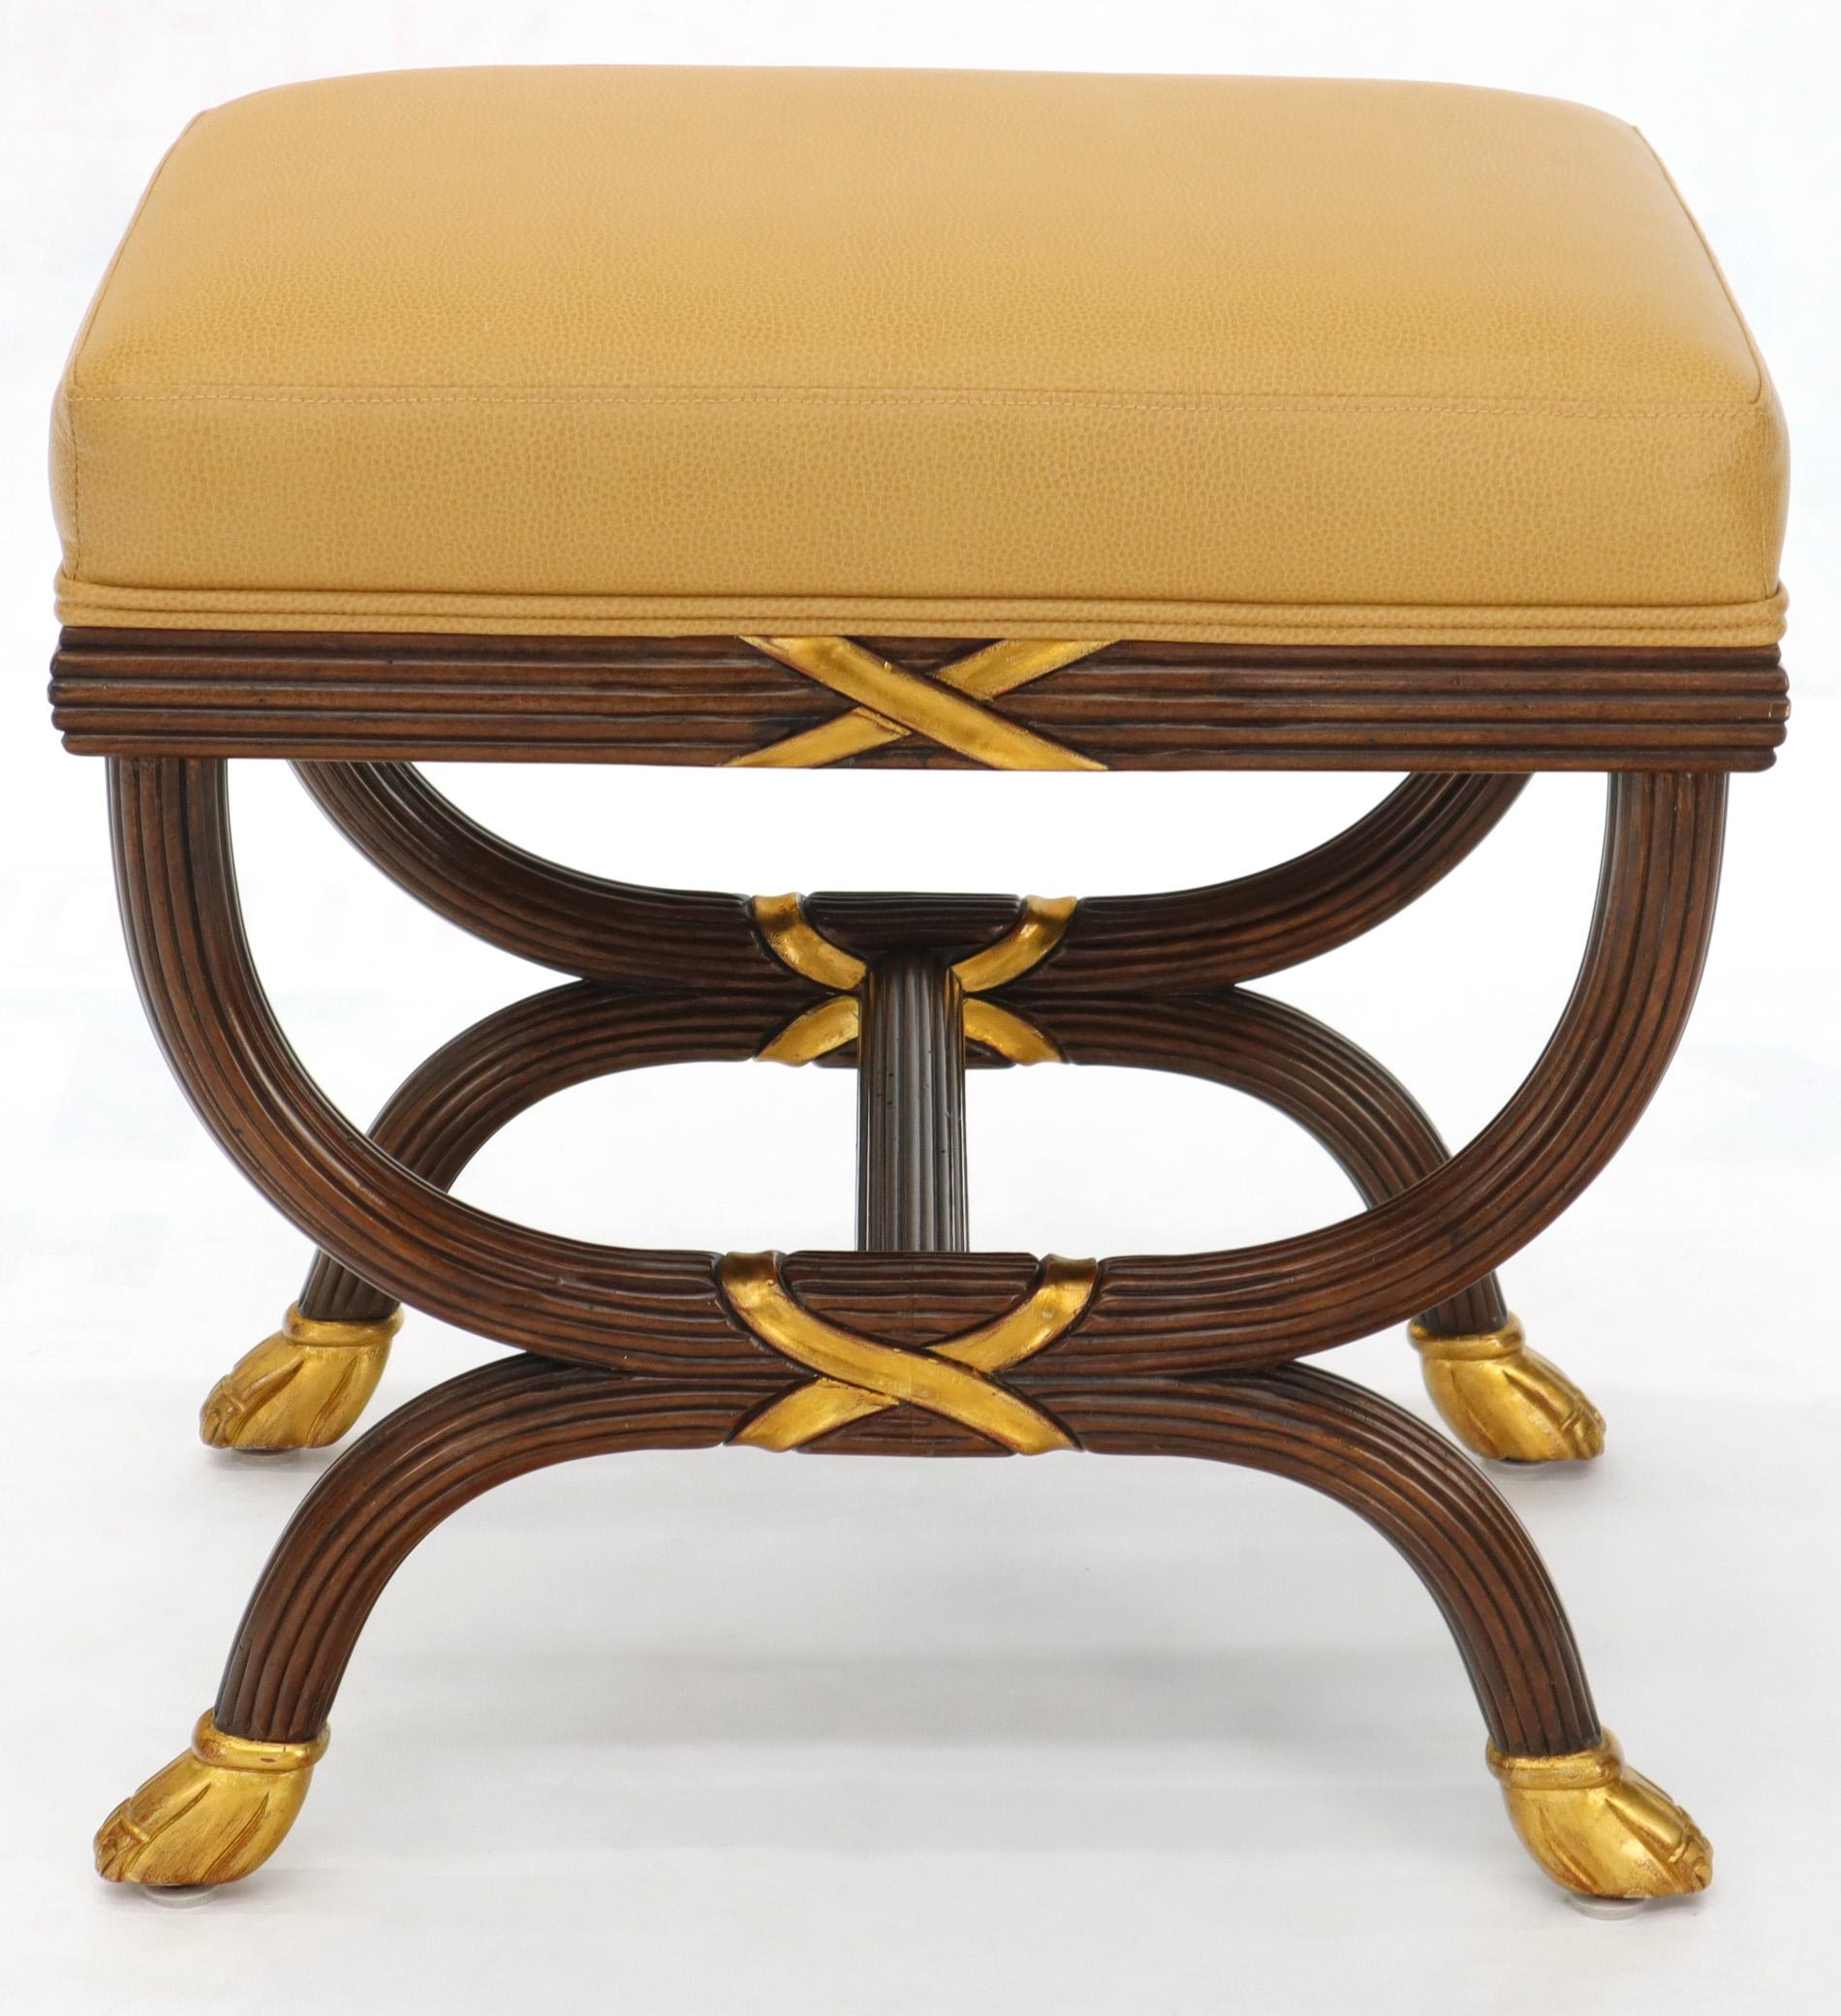 Fluted mahogany x base faux leather upholstery bench seat foot stool by William Switzer.